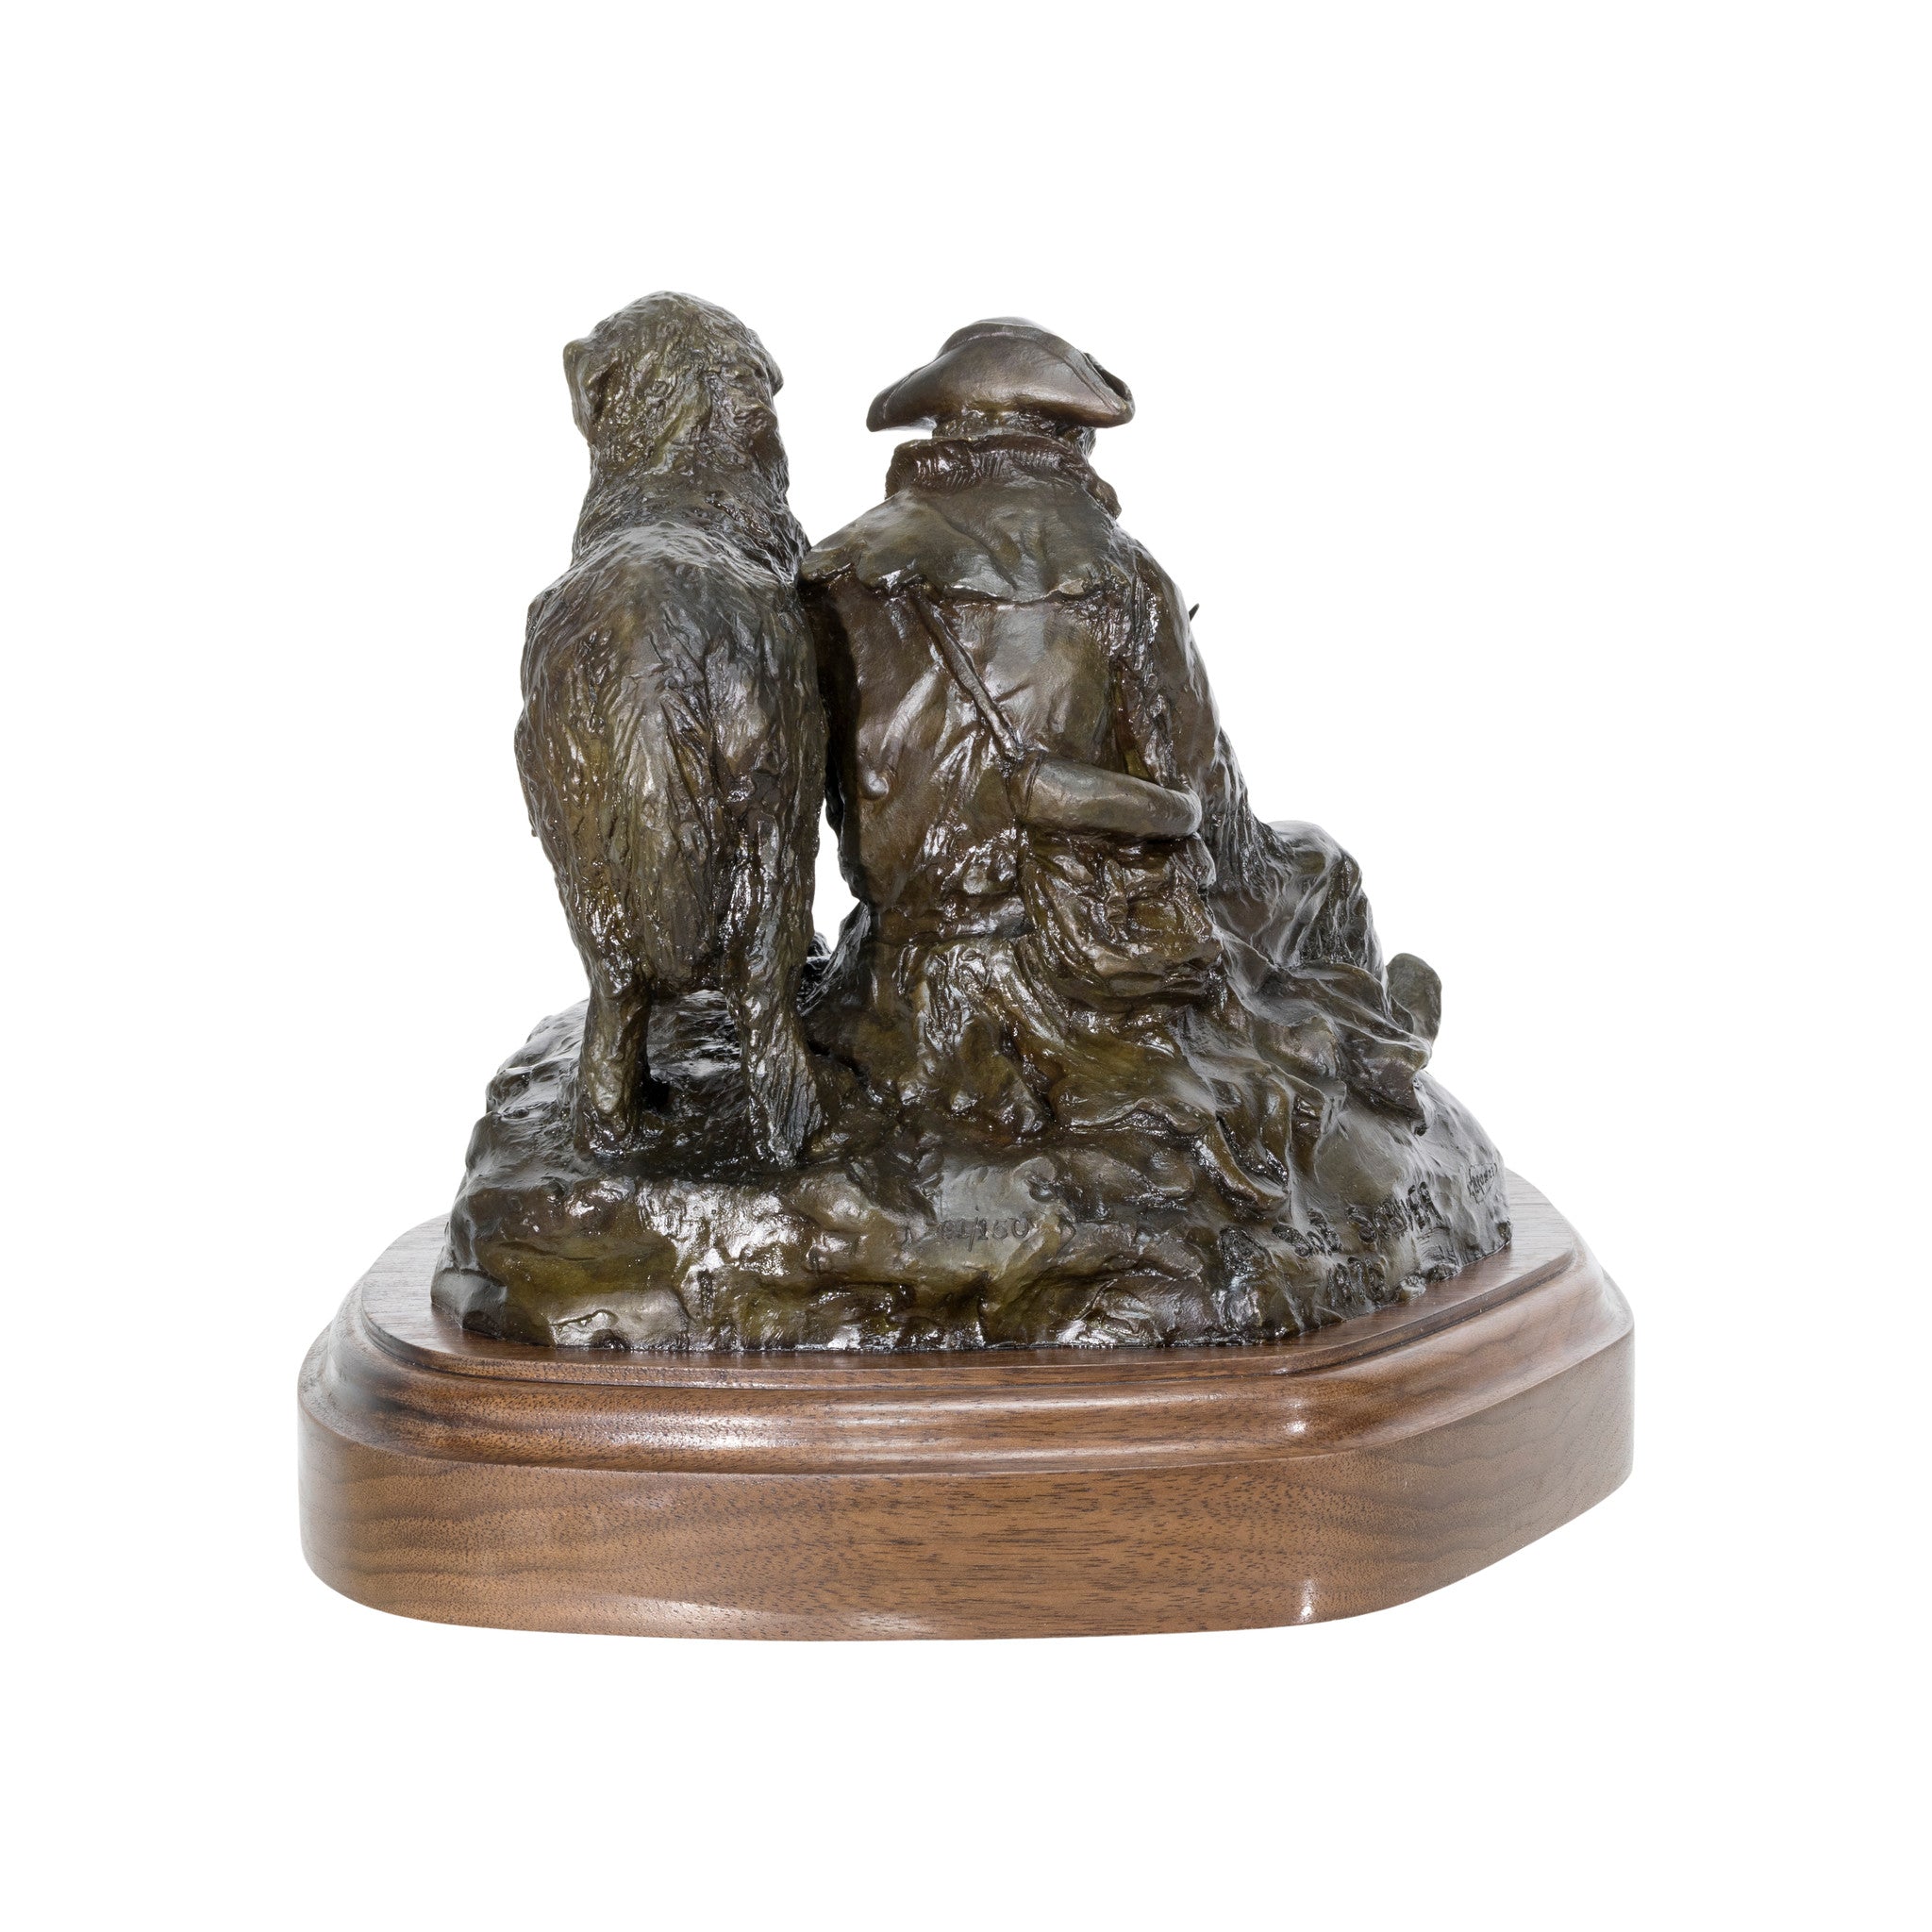 "Capt. Lewis and Our Dog Scannon" Bronze by Robert Scriver